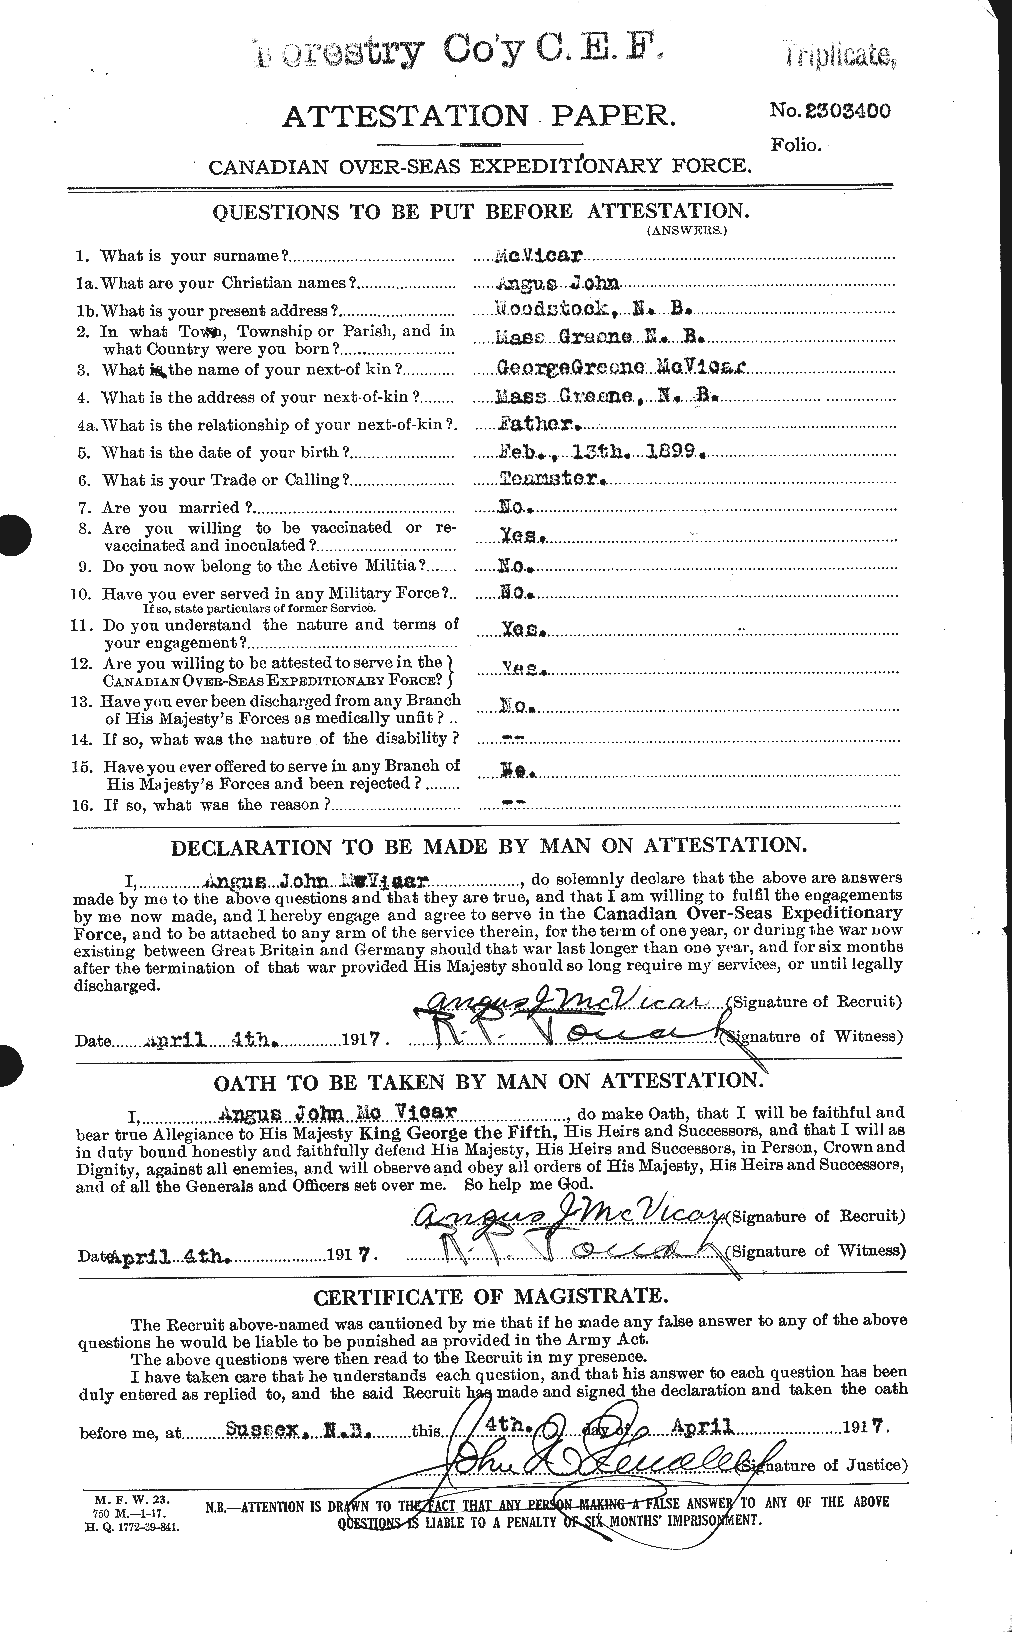 Personnel Records of the First World War - CEF 547299a